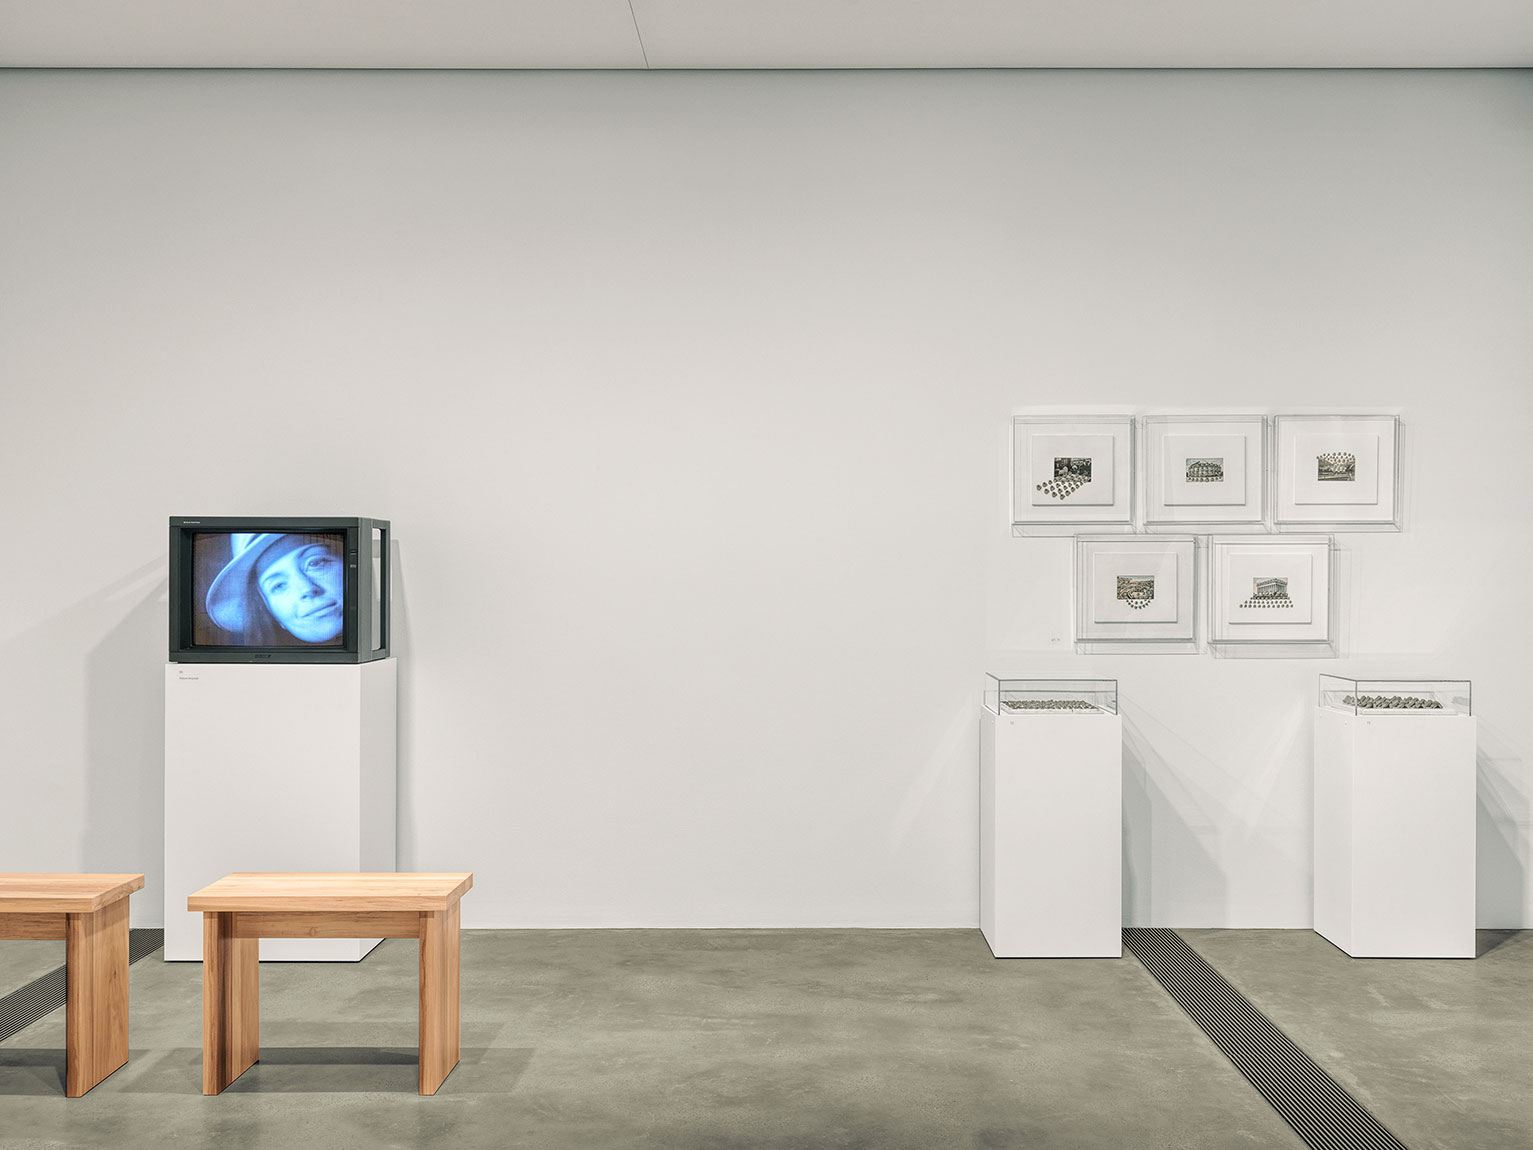 (Left) A monitor on a pedestal with tool stools; (Right) Five framed works and two pedestals